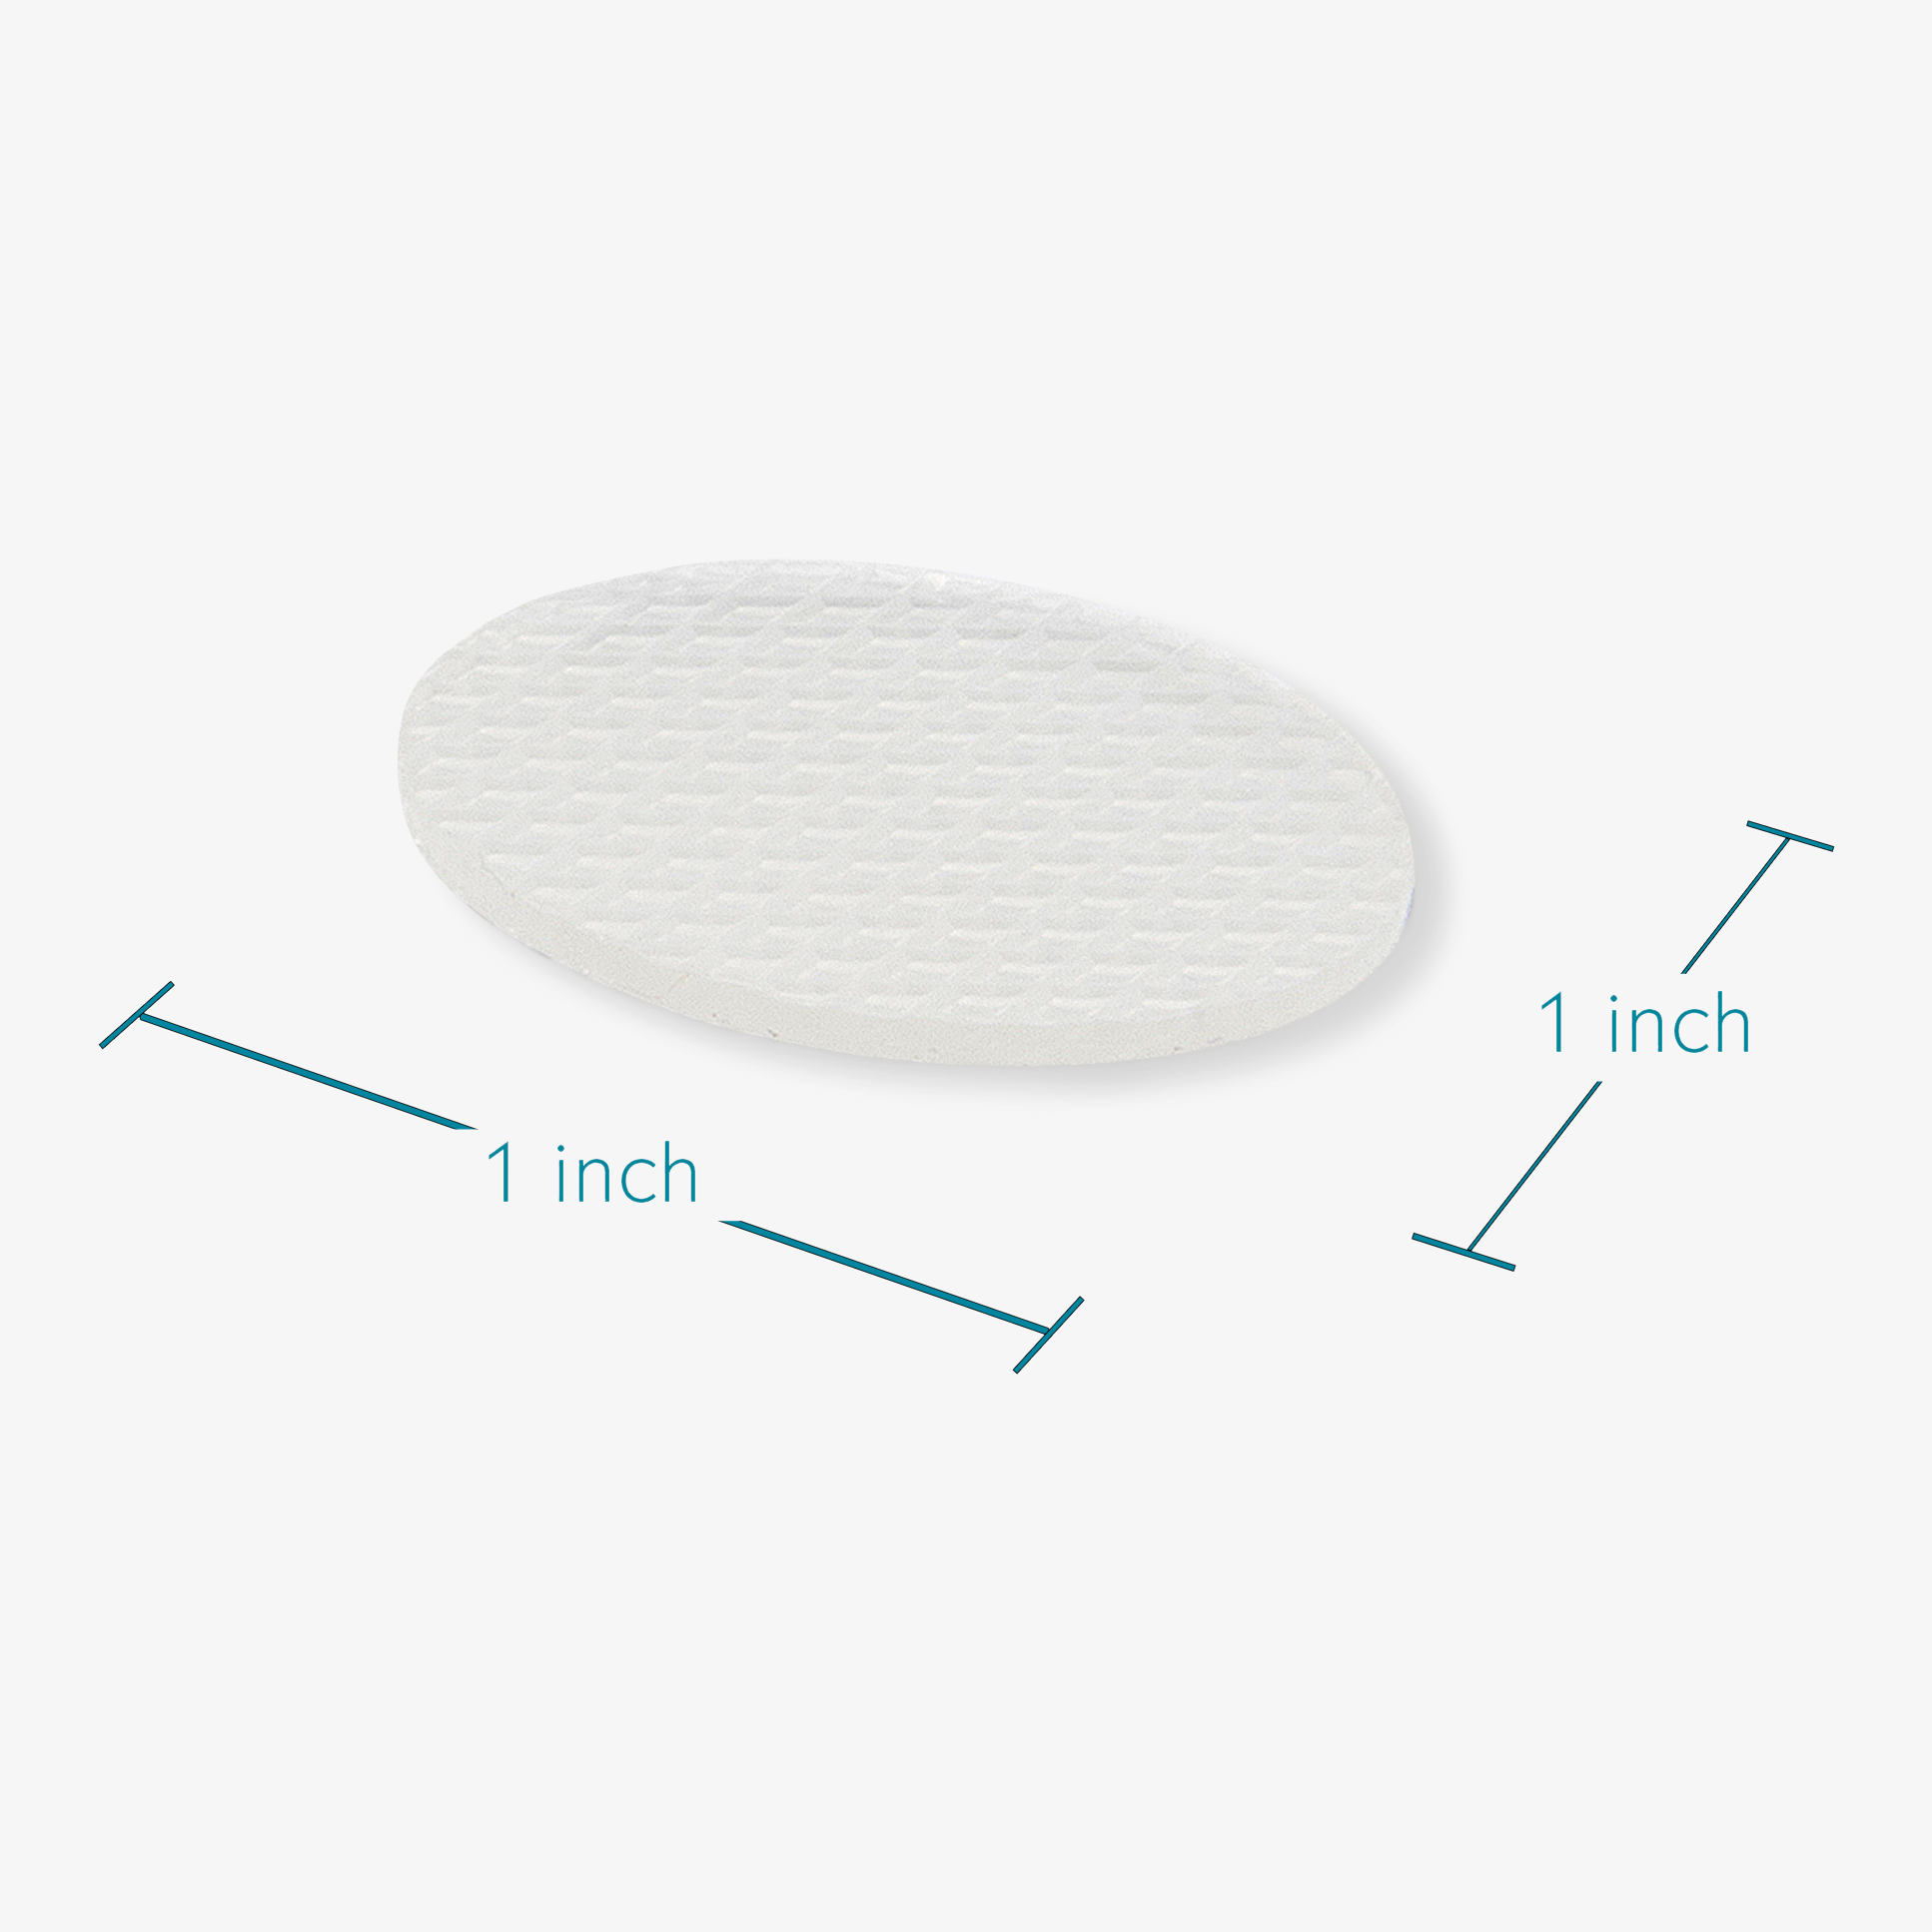 Advanced Medical-Grade Silicone Gel Dots showing dimension | clear